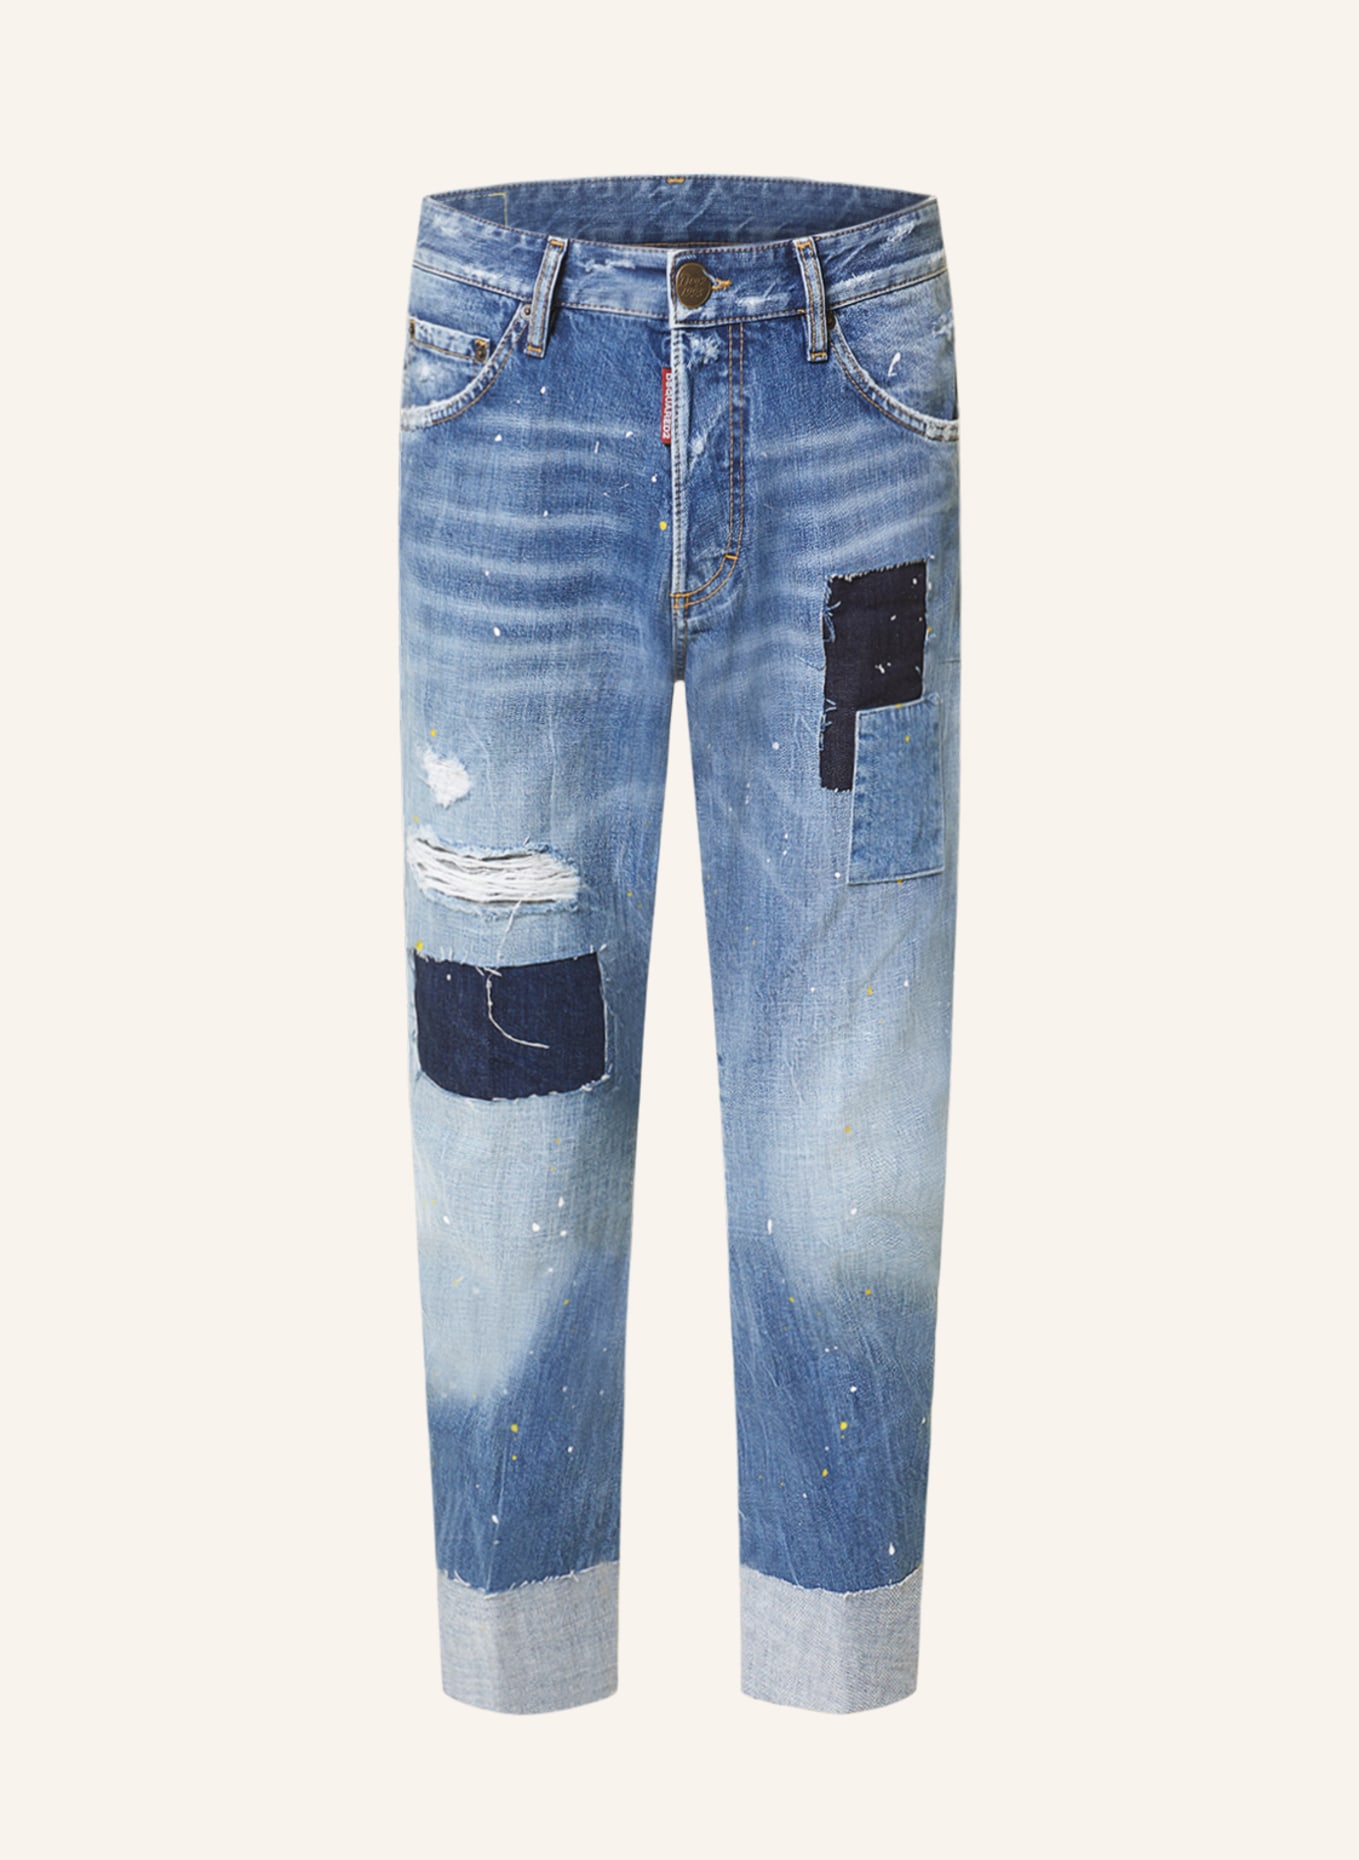 DSQUARED2 Destroyed-Jeans SAILOR Cropped Fit, Farbe: 470 NAVY BLUE (Bild 1)